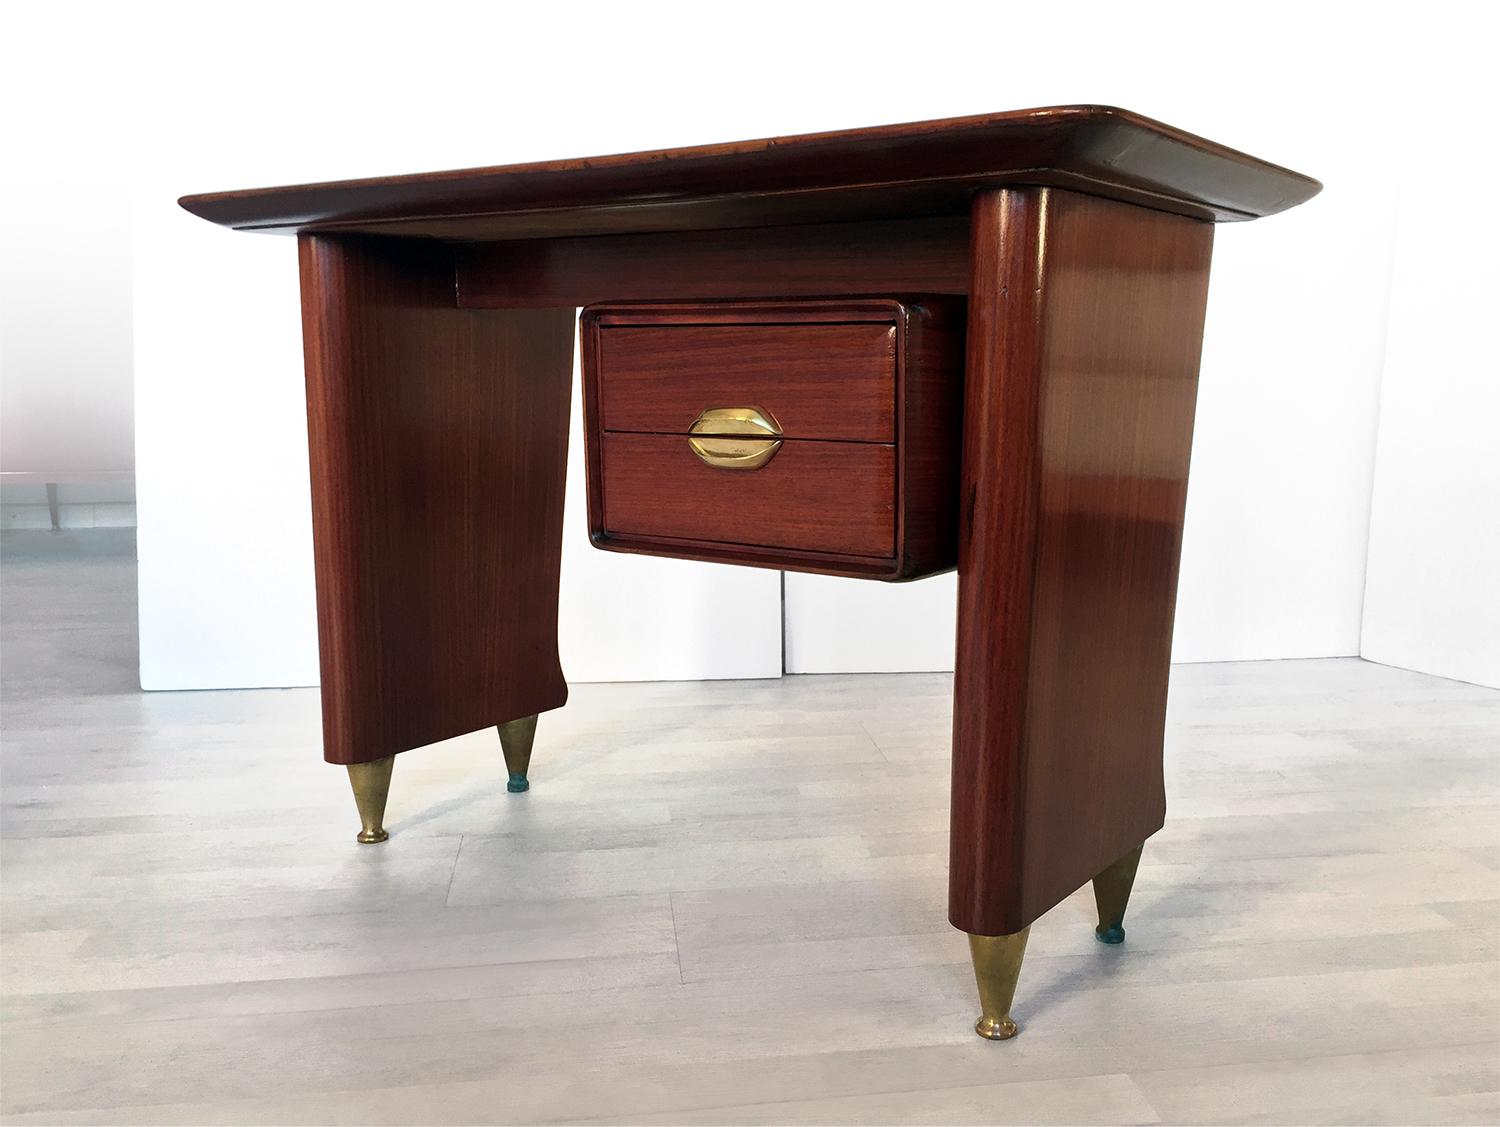 This stunning Italian small writing Desk of the 1950s, also named 'dattilo', is attributable to Vittorio Dassi, and was usually accompanied by its largest executive Desk (see last image).
It has solid structure, finished and supported by conic brass